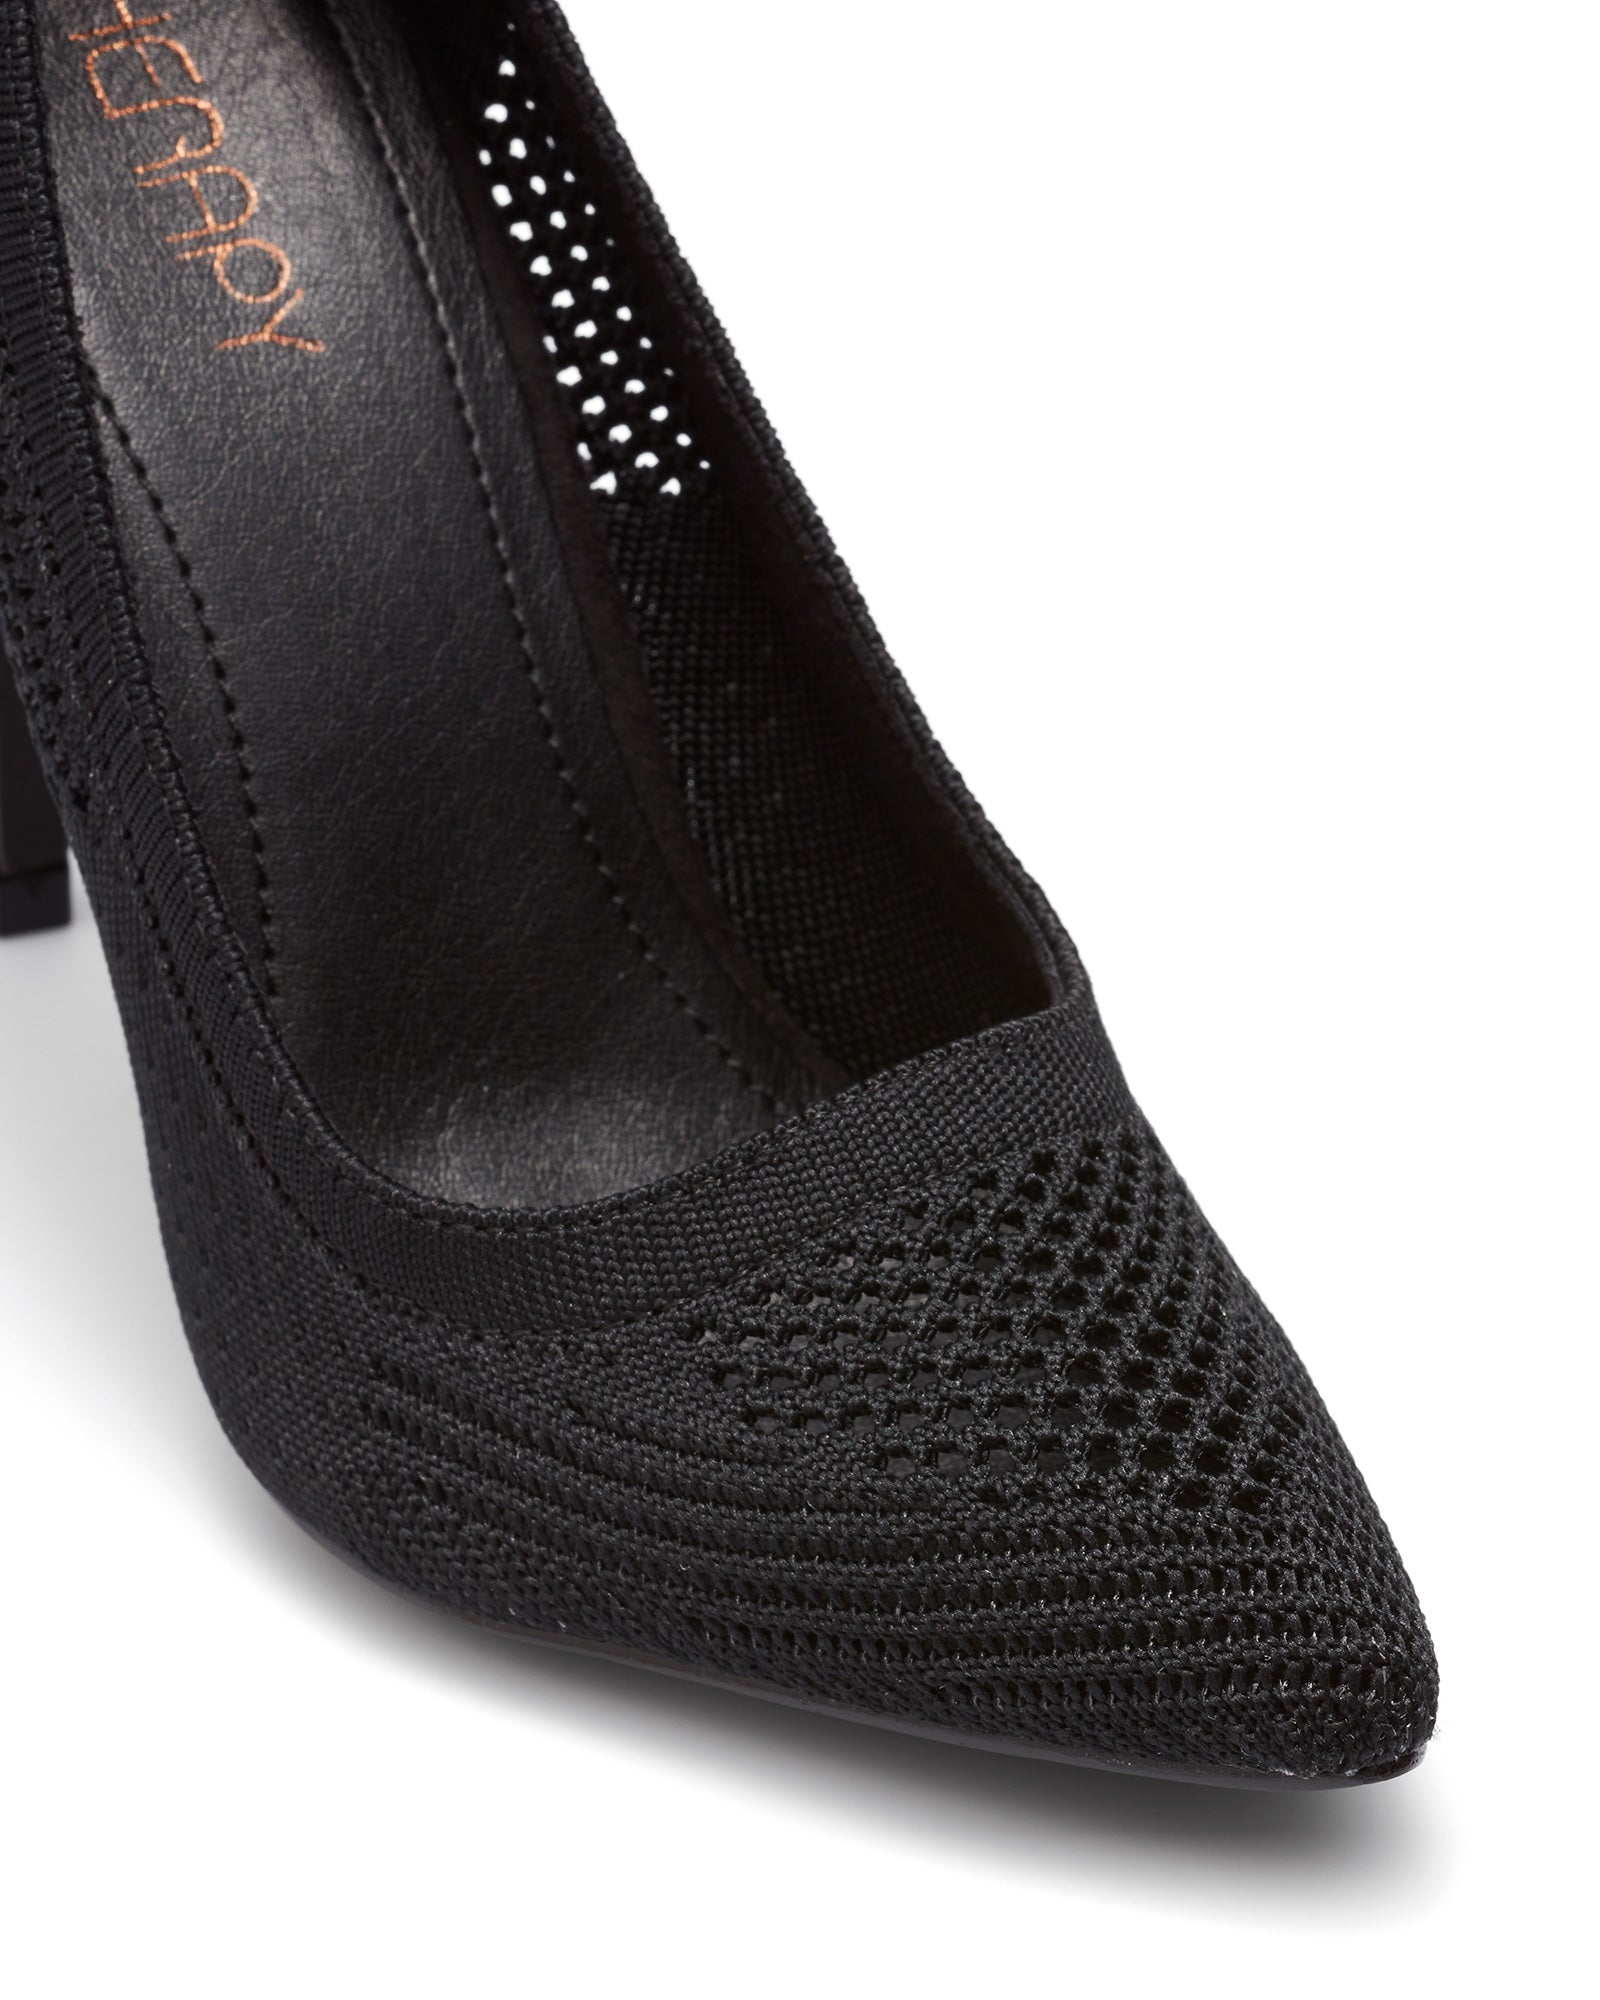 Therapy Shoes Moss Black | Women's Heels | Pumps | Stiletto | Office 